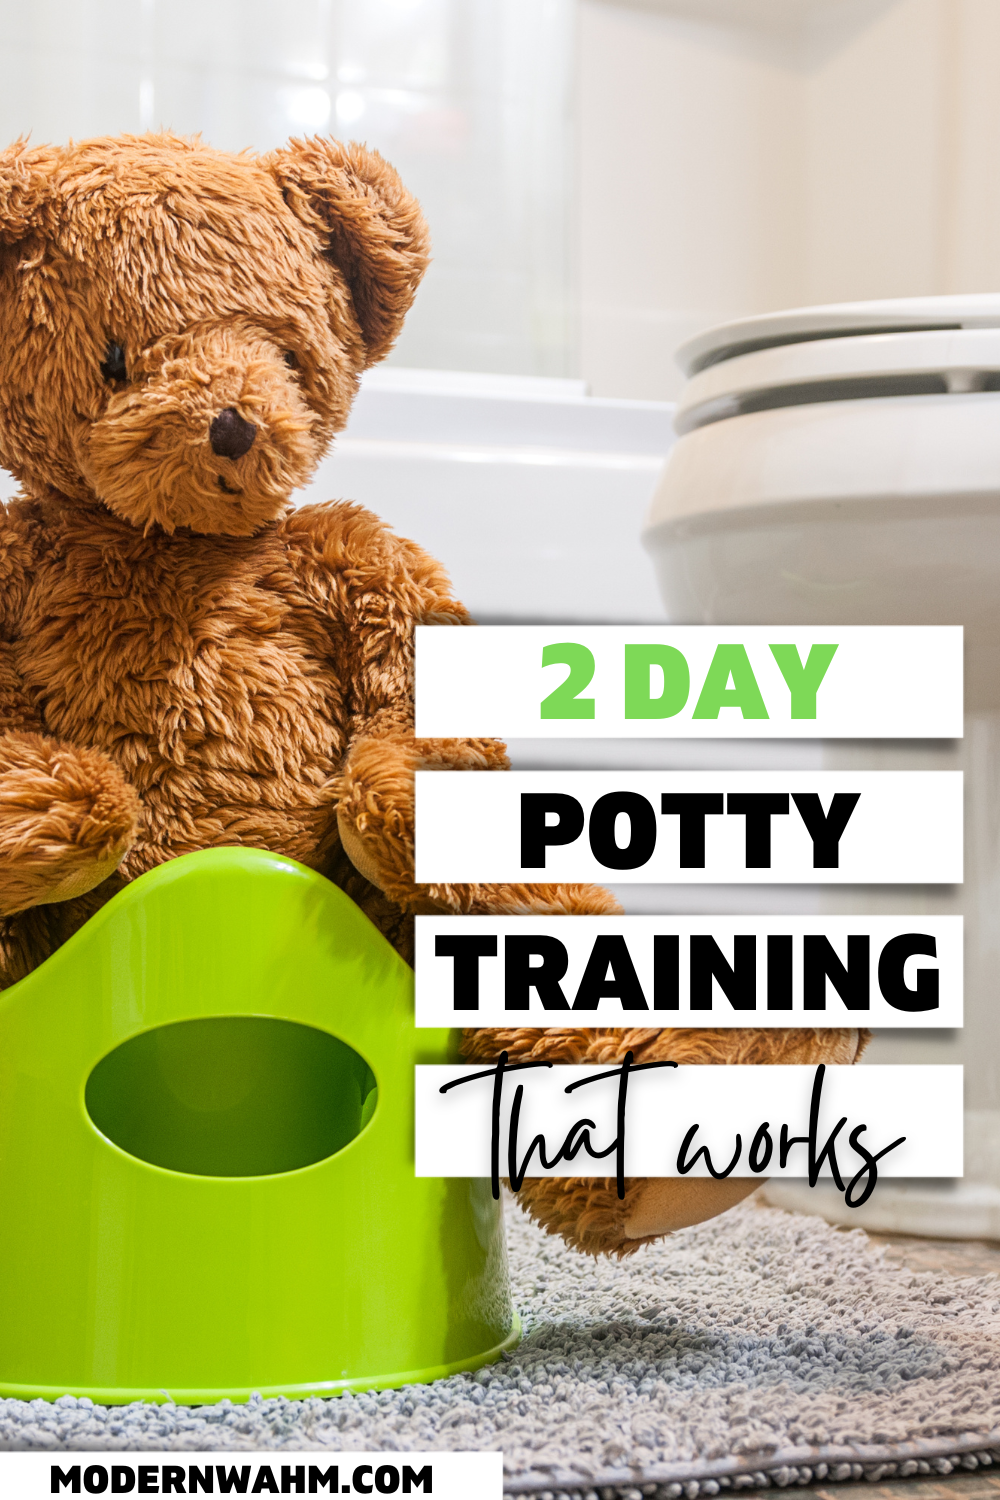 2 day potty training tips that work